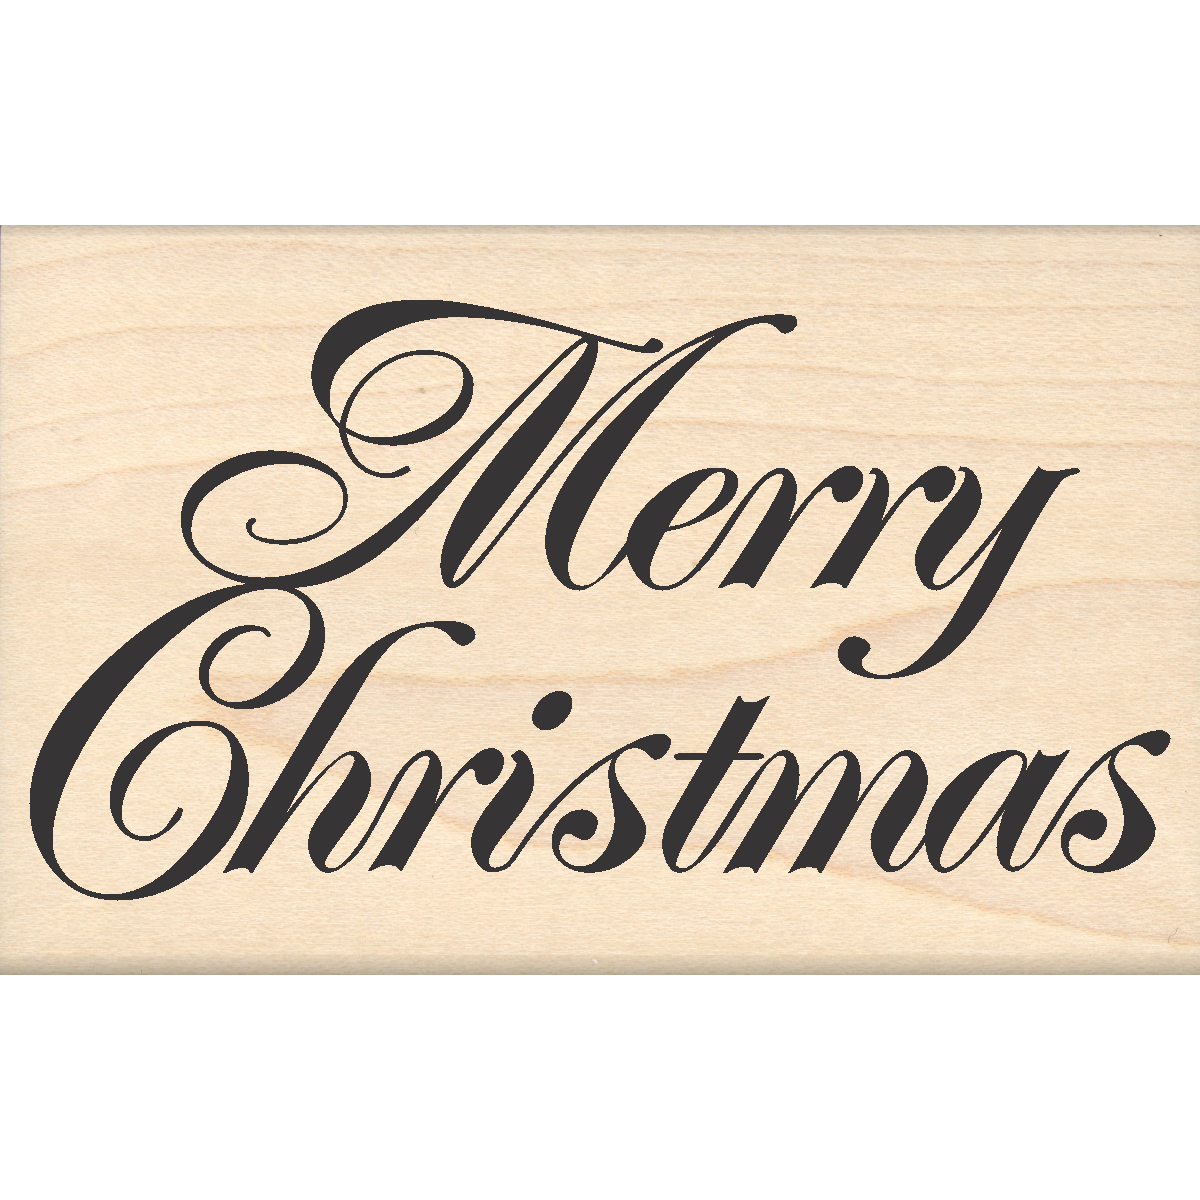 Merry Christmas Rubber Stamp 2.5" x 4" block